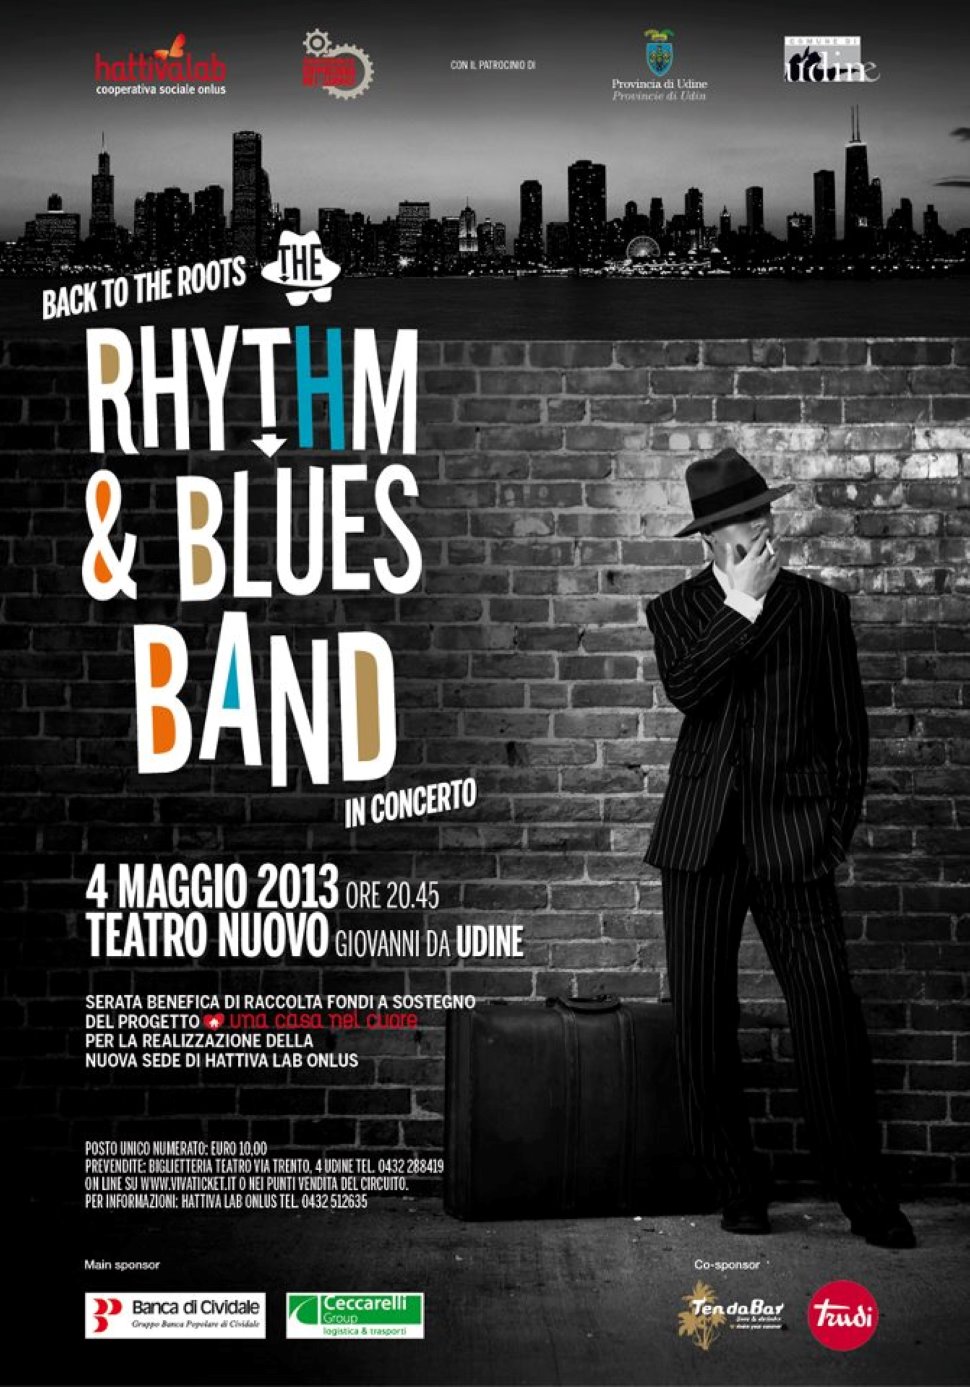 Rhythm & Blues Band in concerto: "Back to the roots"!